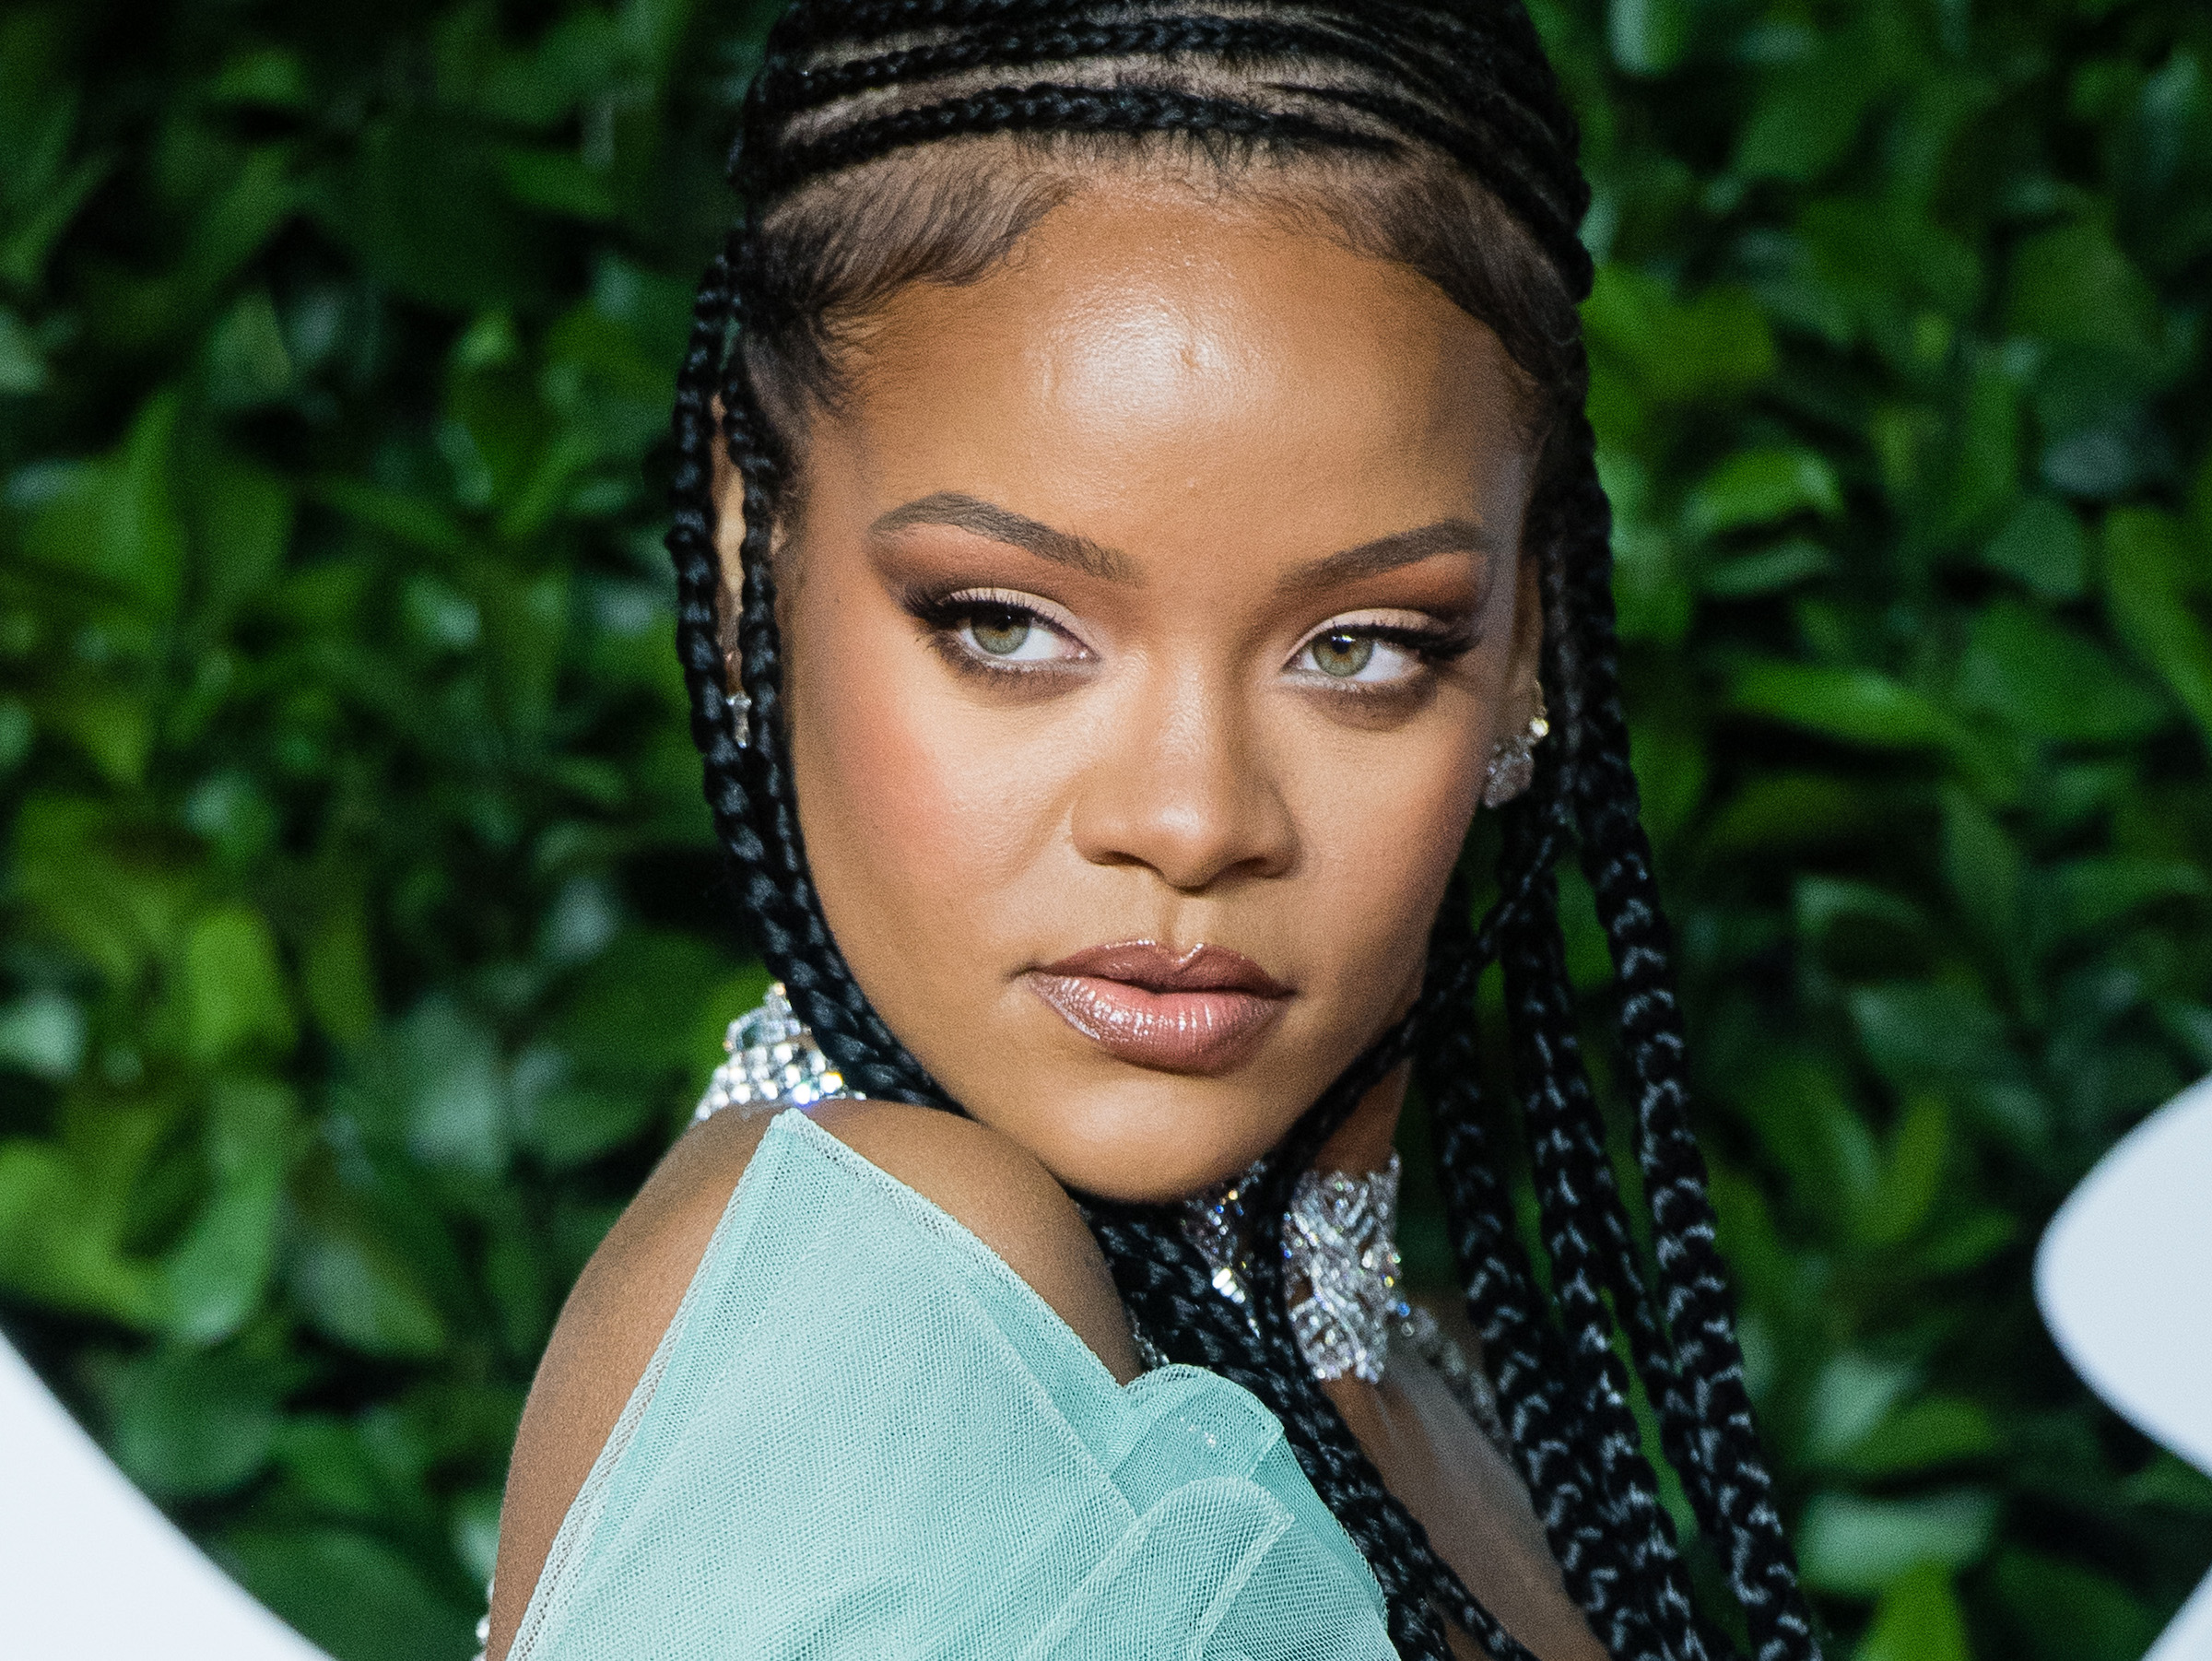 Rihanna poses for photos wearing mint